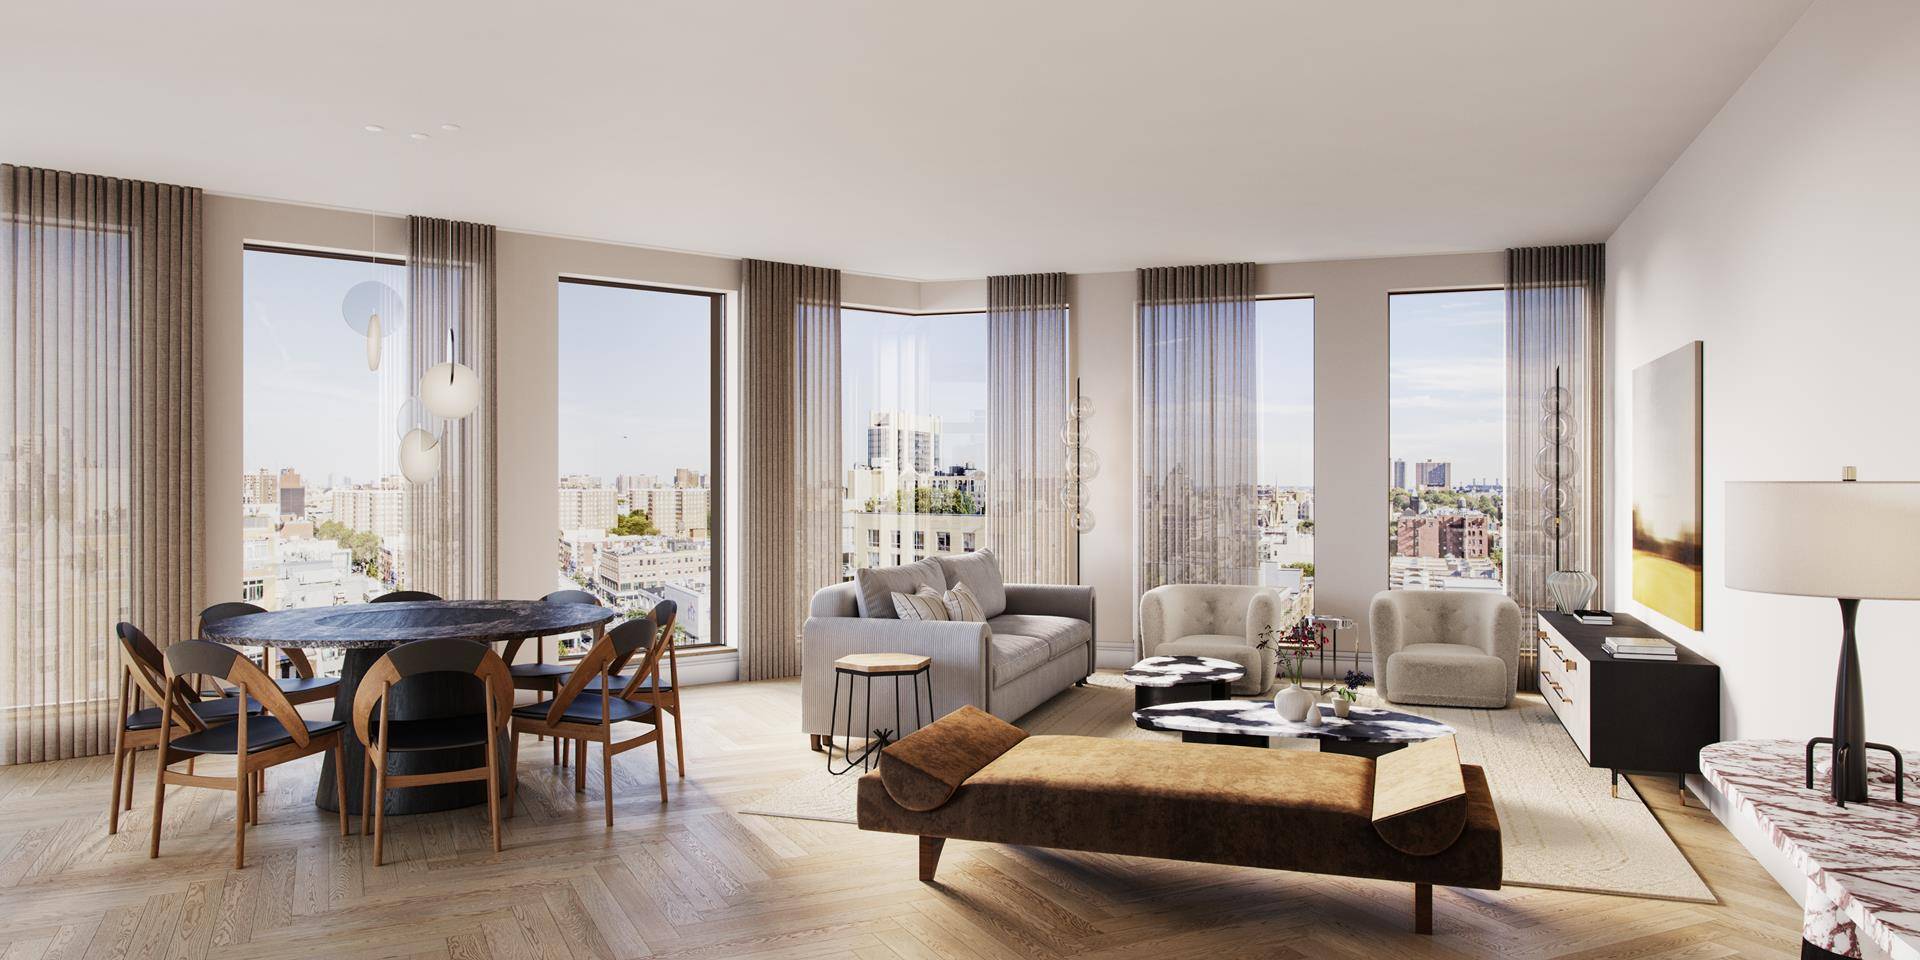 Sales Gallery Now Open By Appointment Introducing residence 5H at 300 West, a double exposure two bedroom, two bathroom, with vast window viewings both east and north.